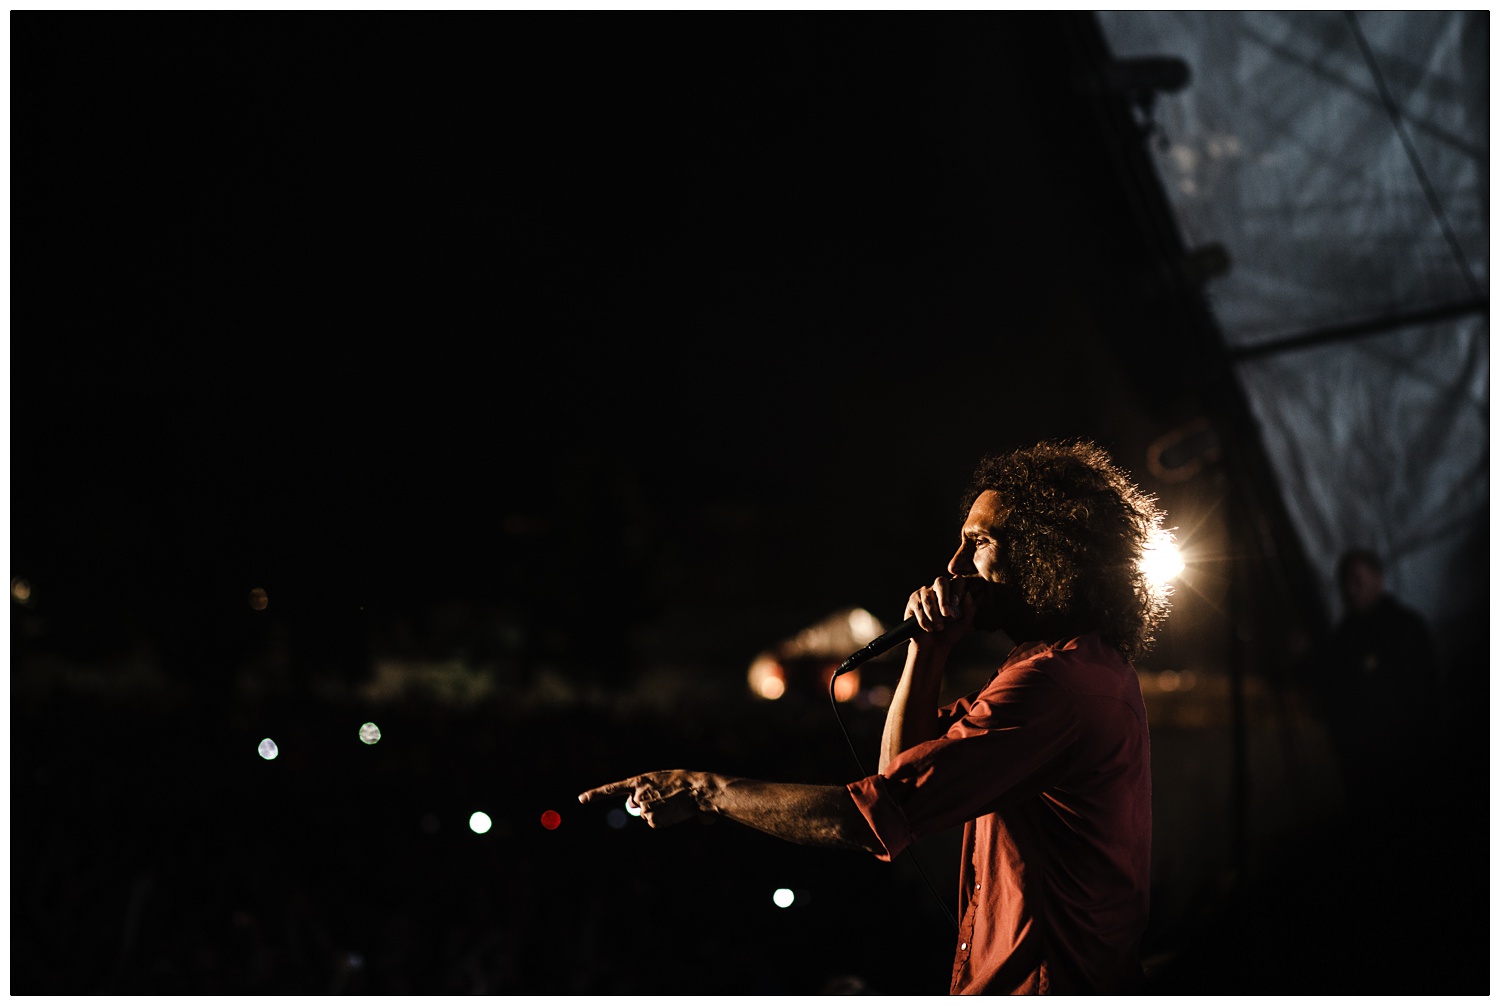 Zack de la Rocha performing on stage in Finsbury Park 2010. He is pointing out to the crowd and a light shines behind him